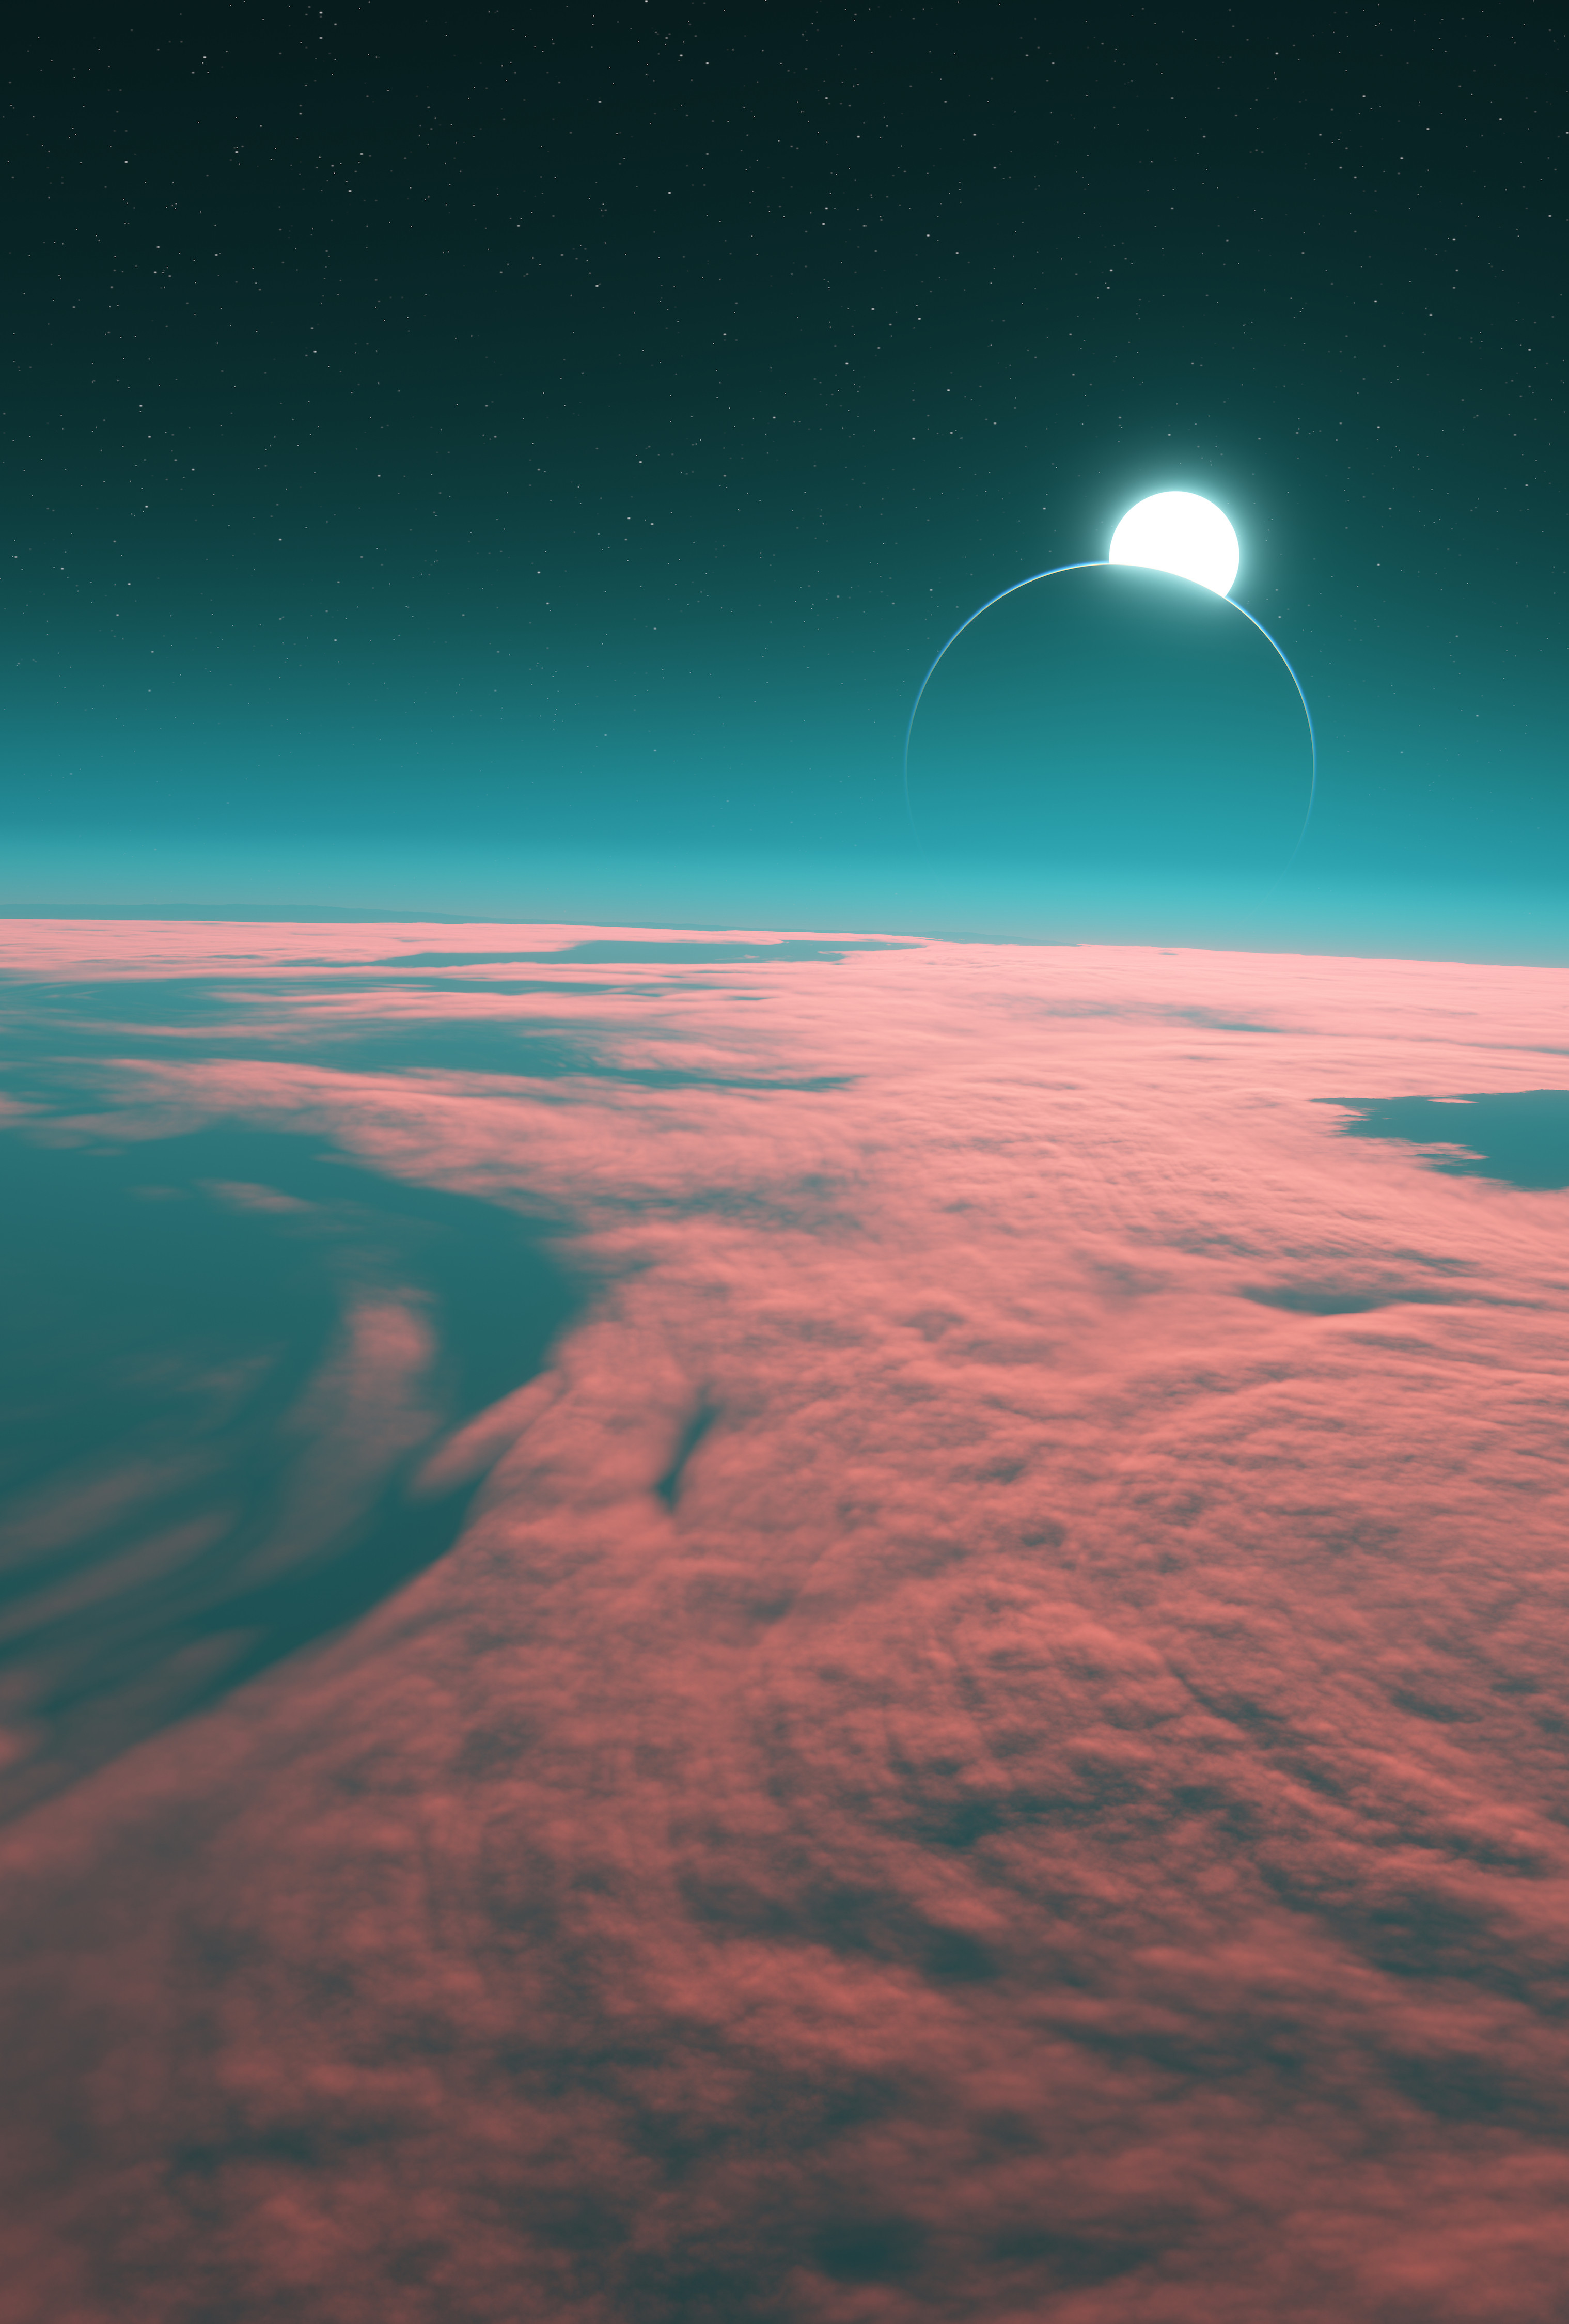 Skimming the reddened clouds of a potentially habitable super-earth with its moon visible.